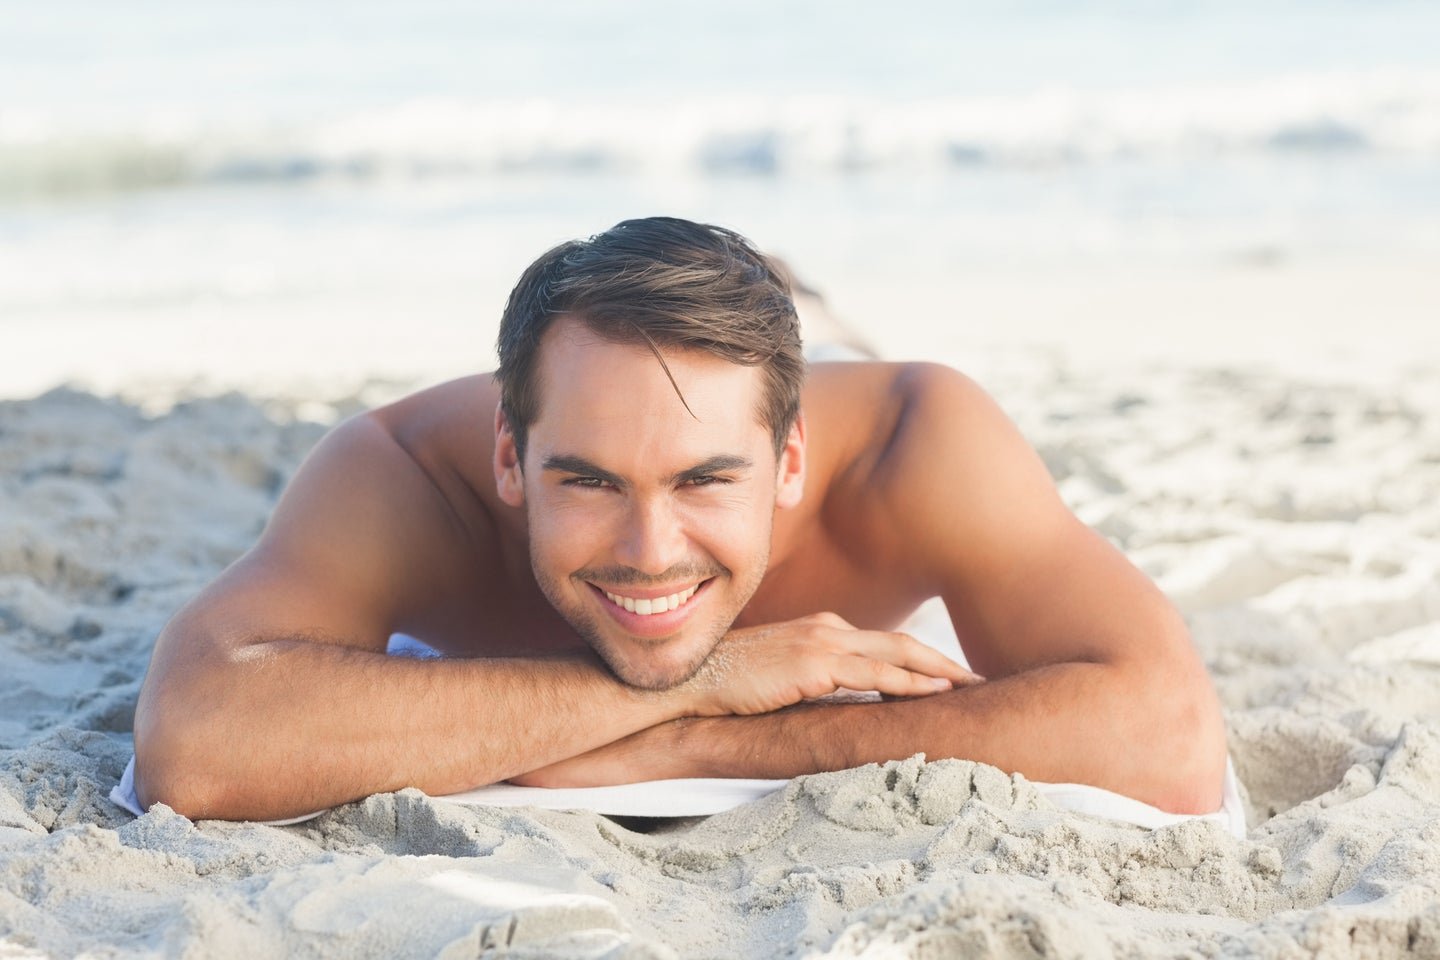 You can get all the benefits of butthole sunning without taking your clothes off